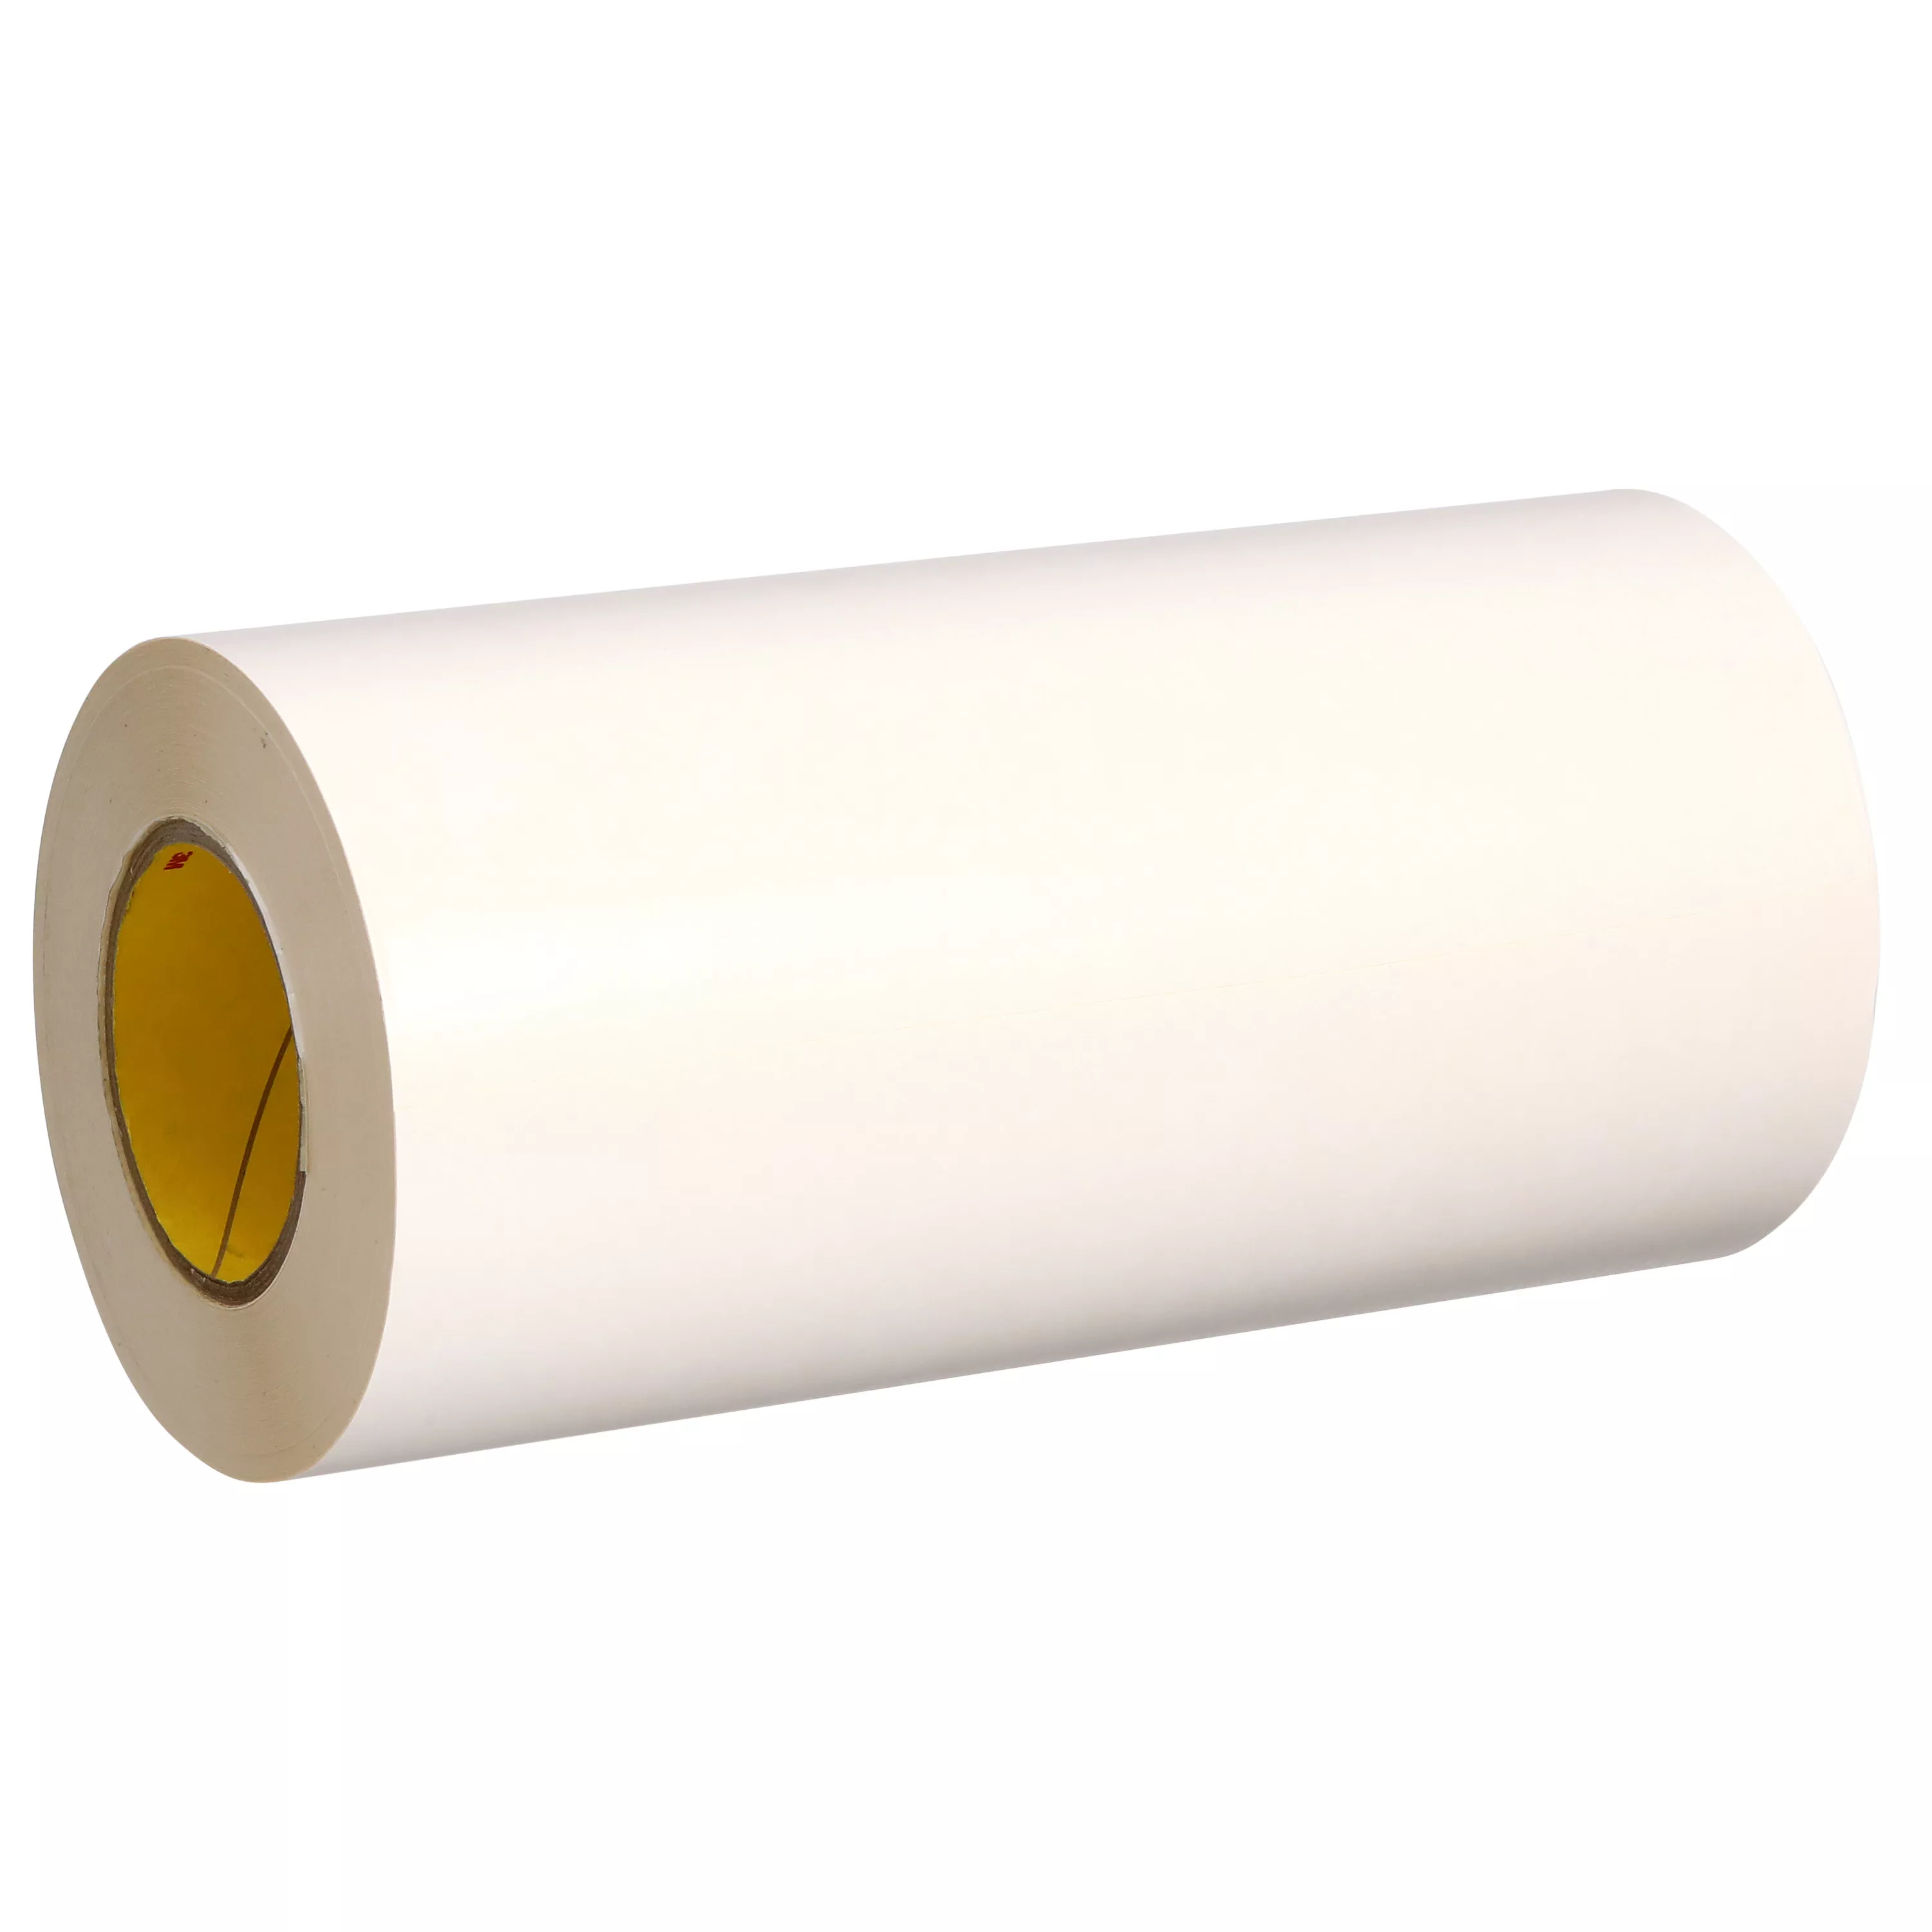 SKU 7100174124 | 3M™ Double Coated Polyester Tape 442KW